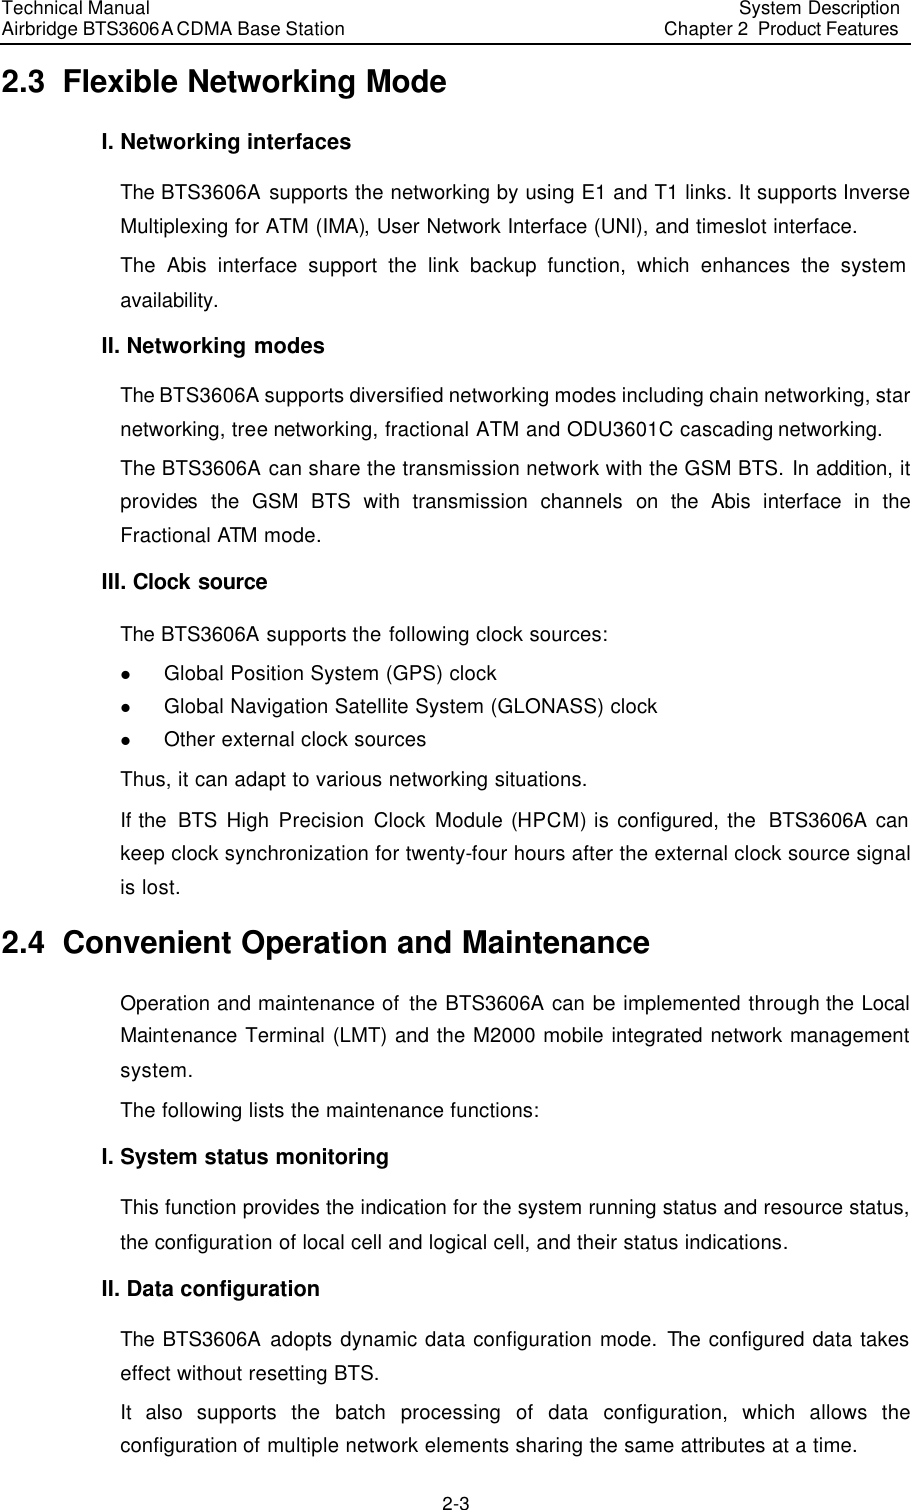 Technical Manual Airbridge BTS3606A CDMA Base Station System Description Chapter 2  Product Features   2-3 2.3  Flexible Networking Mode I. Networking interfaces The BTS3606A supports the networking by using E1 and T1 links. It supports Inverse Multiplexing for ATM (IMA), User Network Interface (UNI), and timeslot interface. The Abis interface support the link backup function, which enhances the system availability. II. Networking modes The BTS3606A supports diversified networking modes including chain networking, star networking, tree networking, fractional ATM and ODU3601C cascading networking. The BTS3606A can share the transmission network with the GSM BTS. In addition, it provides the GSM BTS with transmission channels on the Abis interface in the Fractional ATM mode. III. Clock source The BTS3606A supports the following clock sources: l Global Position System (GPS) clock l Global Navigation Satellite System (GLONASS) clock l Other external clock sources Thus, it can adapt to various networking situations. If the  BTS High Precision Clock Module (HPCM) is configured, the  BTS3606A can keep clock synchronization for twenty-four hours after the external clock source signal is lost. 2.4  Convenient Operation and Maintenance Operation and maintenance of the BTS3606A can be implemented through the Local Maintenance Terminal (LMT) and the M2000 mobile integrated network management system. The following lists the maintenance functions: I. System status monitoring This function provides the indication for the system running status and resource status, the configuration of local cell and logical cell, and their status indications. II. Data configuration The BTS3606A adopts dynamic data configuration mode. The configured data takes effect without resetting BTS.  It also supports the batch processing of data configuration, which allows the configuration of multiple network elements sharing the same attributes at a time.  